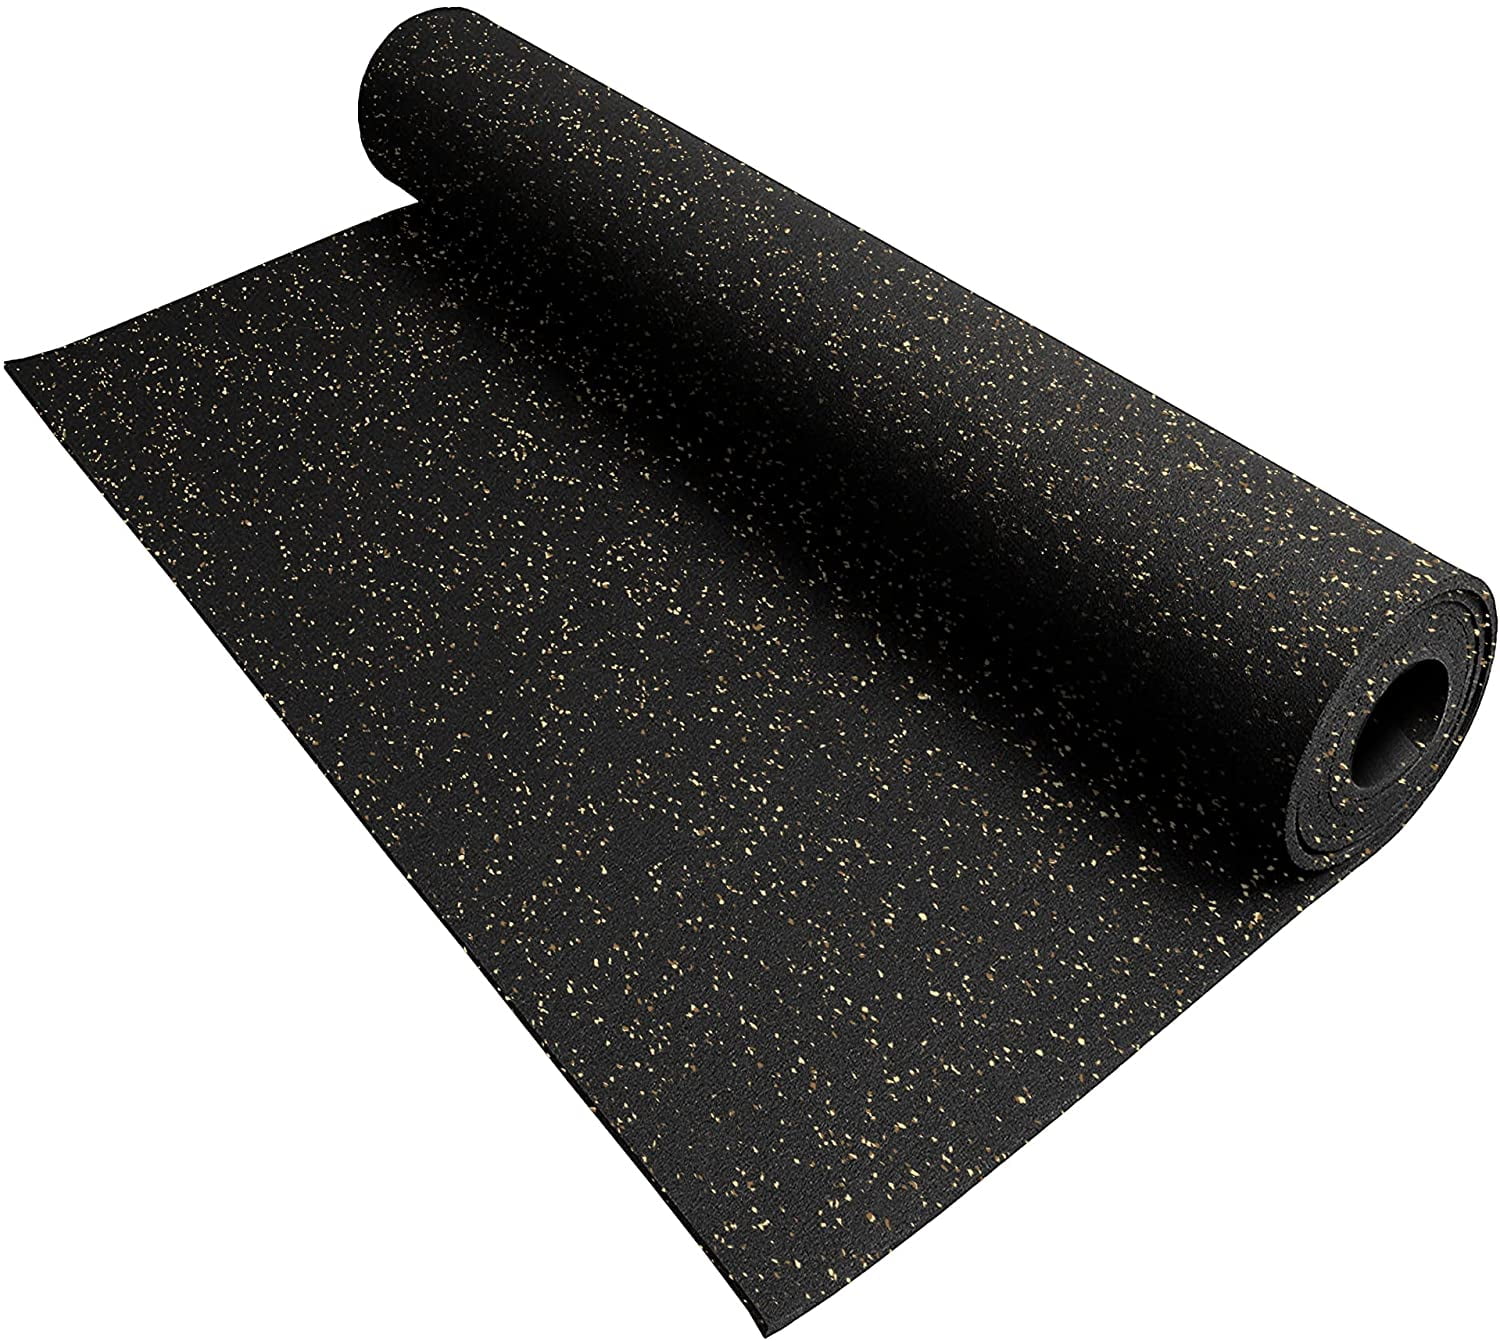 Gym Rubber Flooring mat, 12mm Thickness (6ft x 4ft) Heavy Duty Large, 25kg